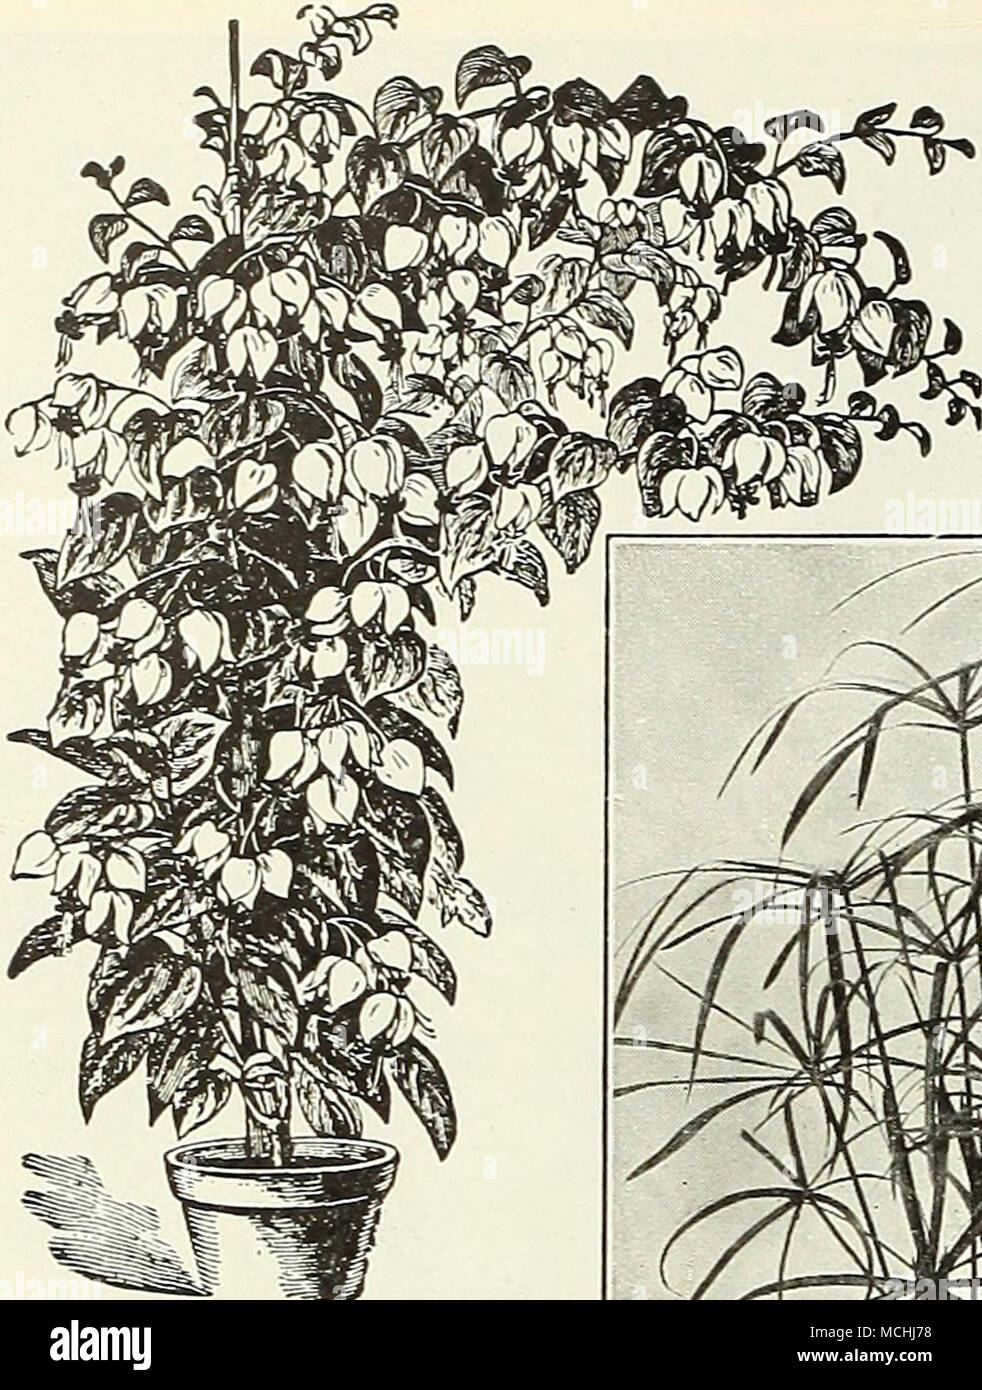 . Clerodendron BOOKS OM HORTICULTURE We offer on the 3rd page of the this catalogue did list of the cover of a splen- above. CyPERUS Alternifolius CESTRUM PARQUI (Night-blooming Jessamine) An interesting tender shrub of easy cultivation, either for pot culture or for planting in the garden when the weather gets warm, with small greenish white flowers of delightful fragrance, which is dispensed during the night only. 25 cts. each; $2.50 per doz. CLERODENDRONS Balfouri. A beautiful greenhouse climber, and admirably suited for house culture, flowering most profusely with bright scarlet flowers, e Stock Photo